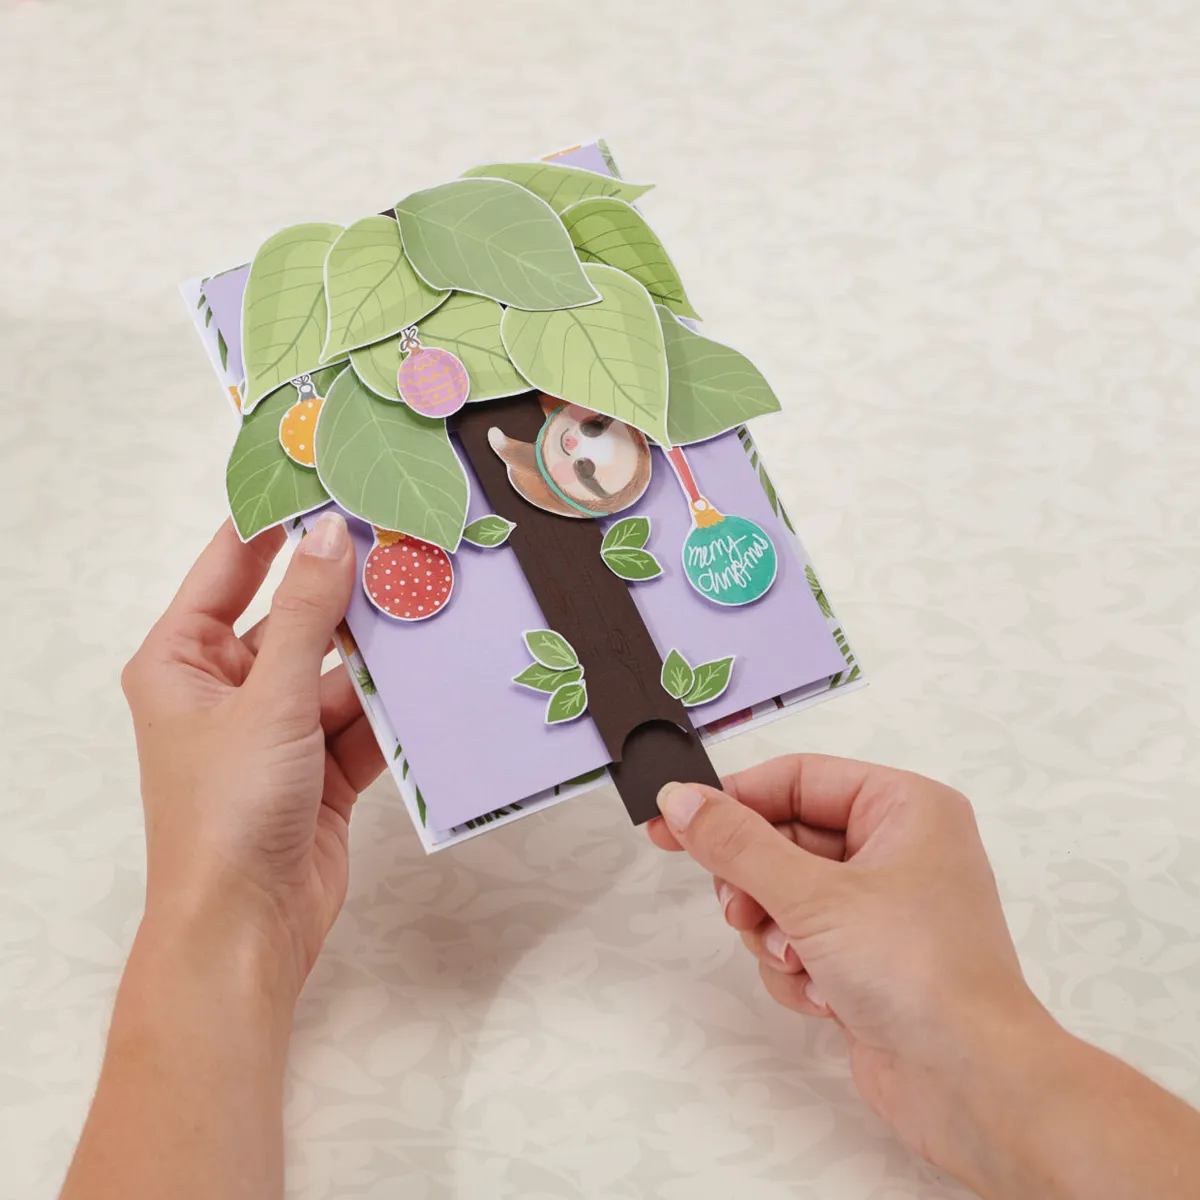 How to make a pop-up sloth card